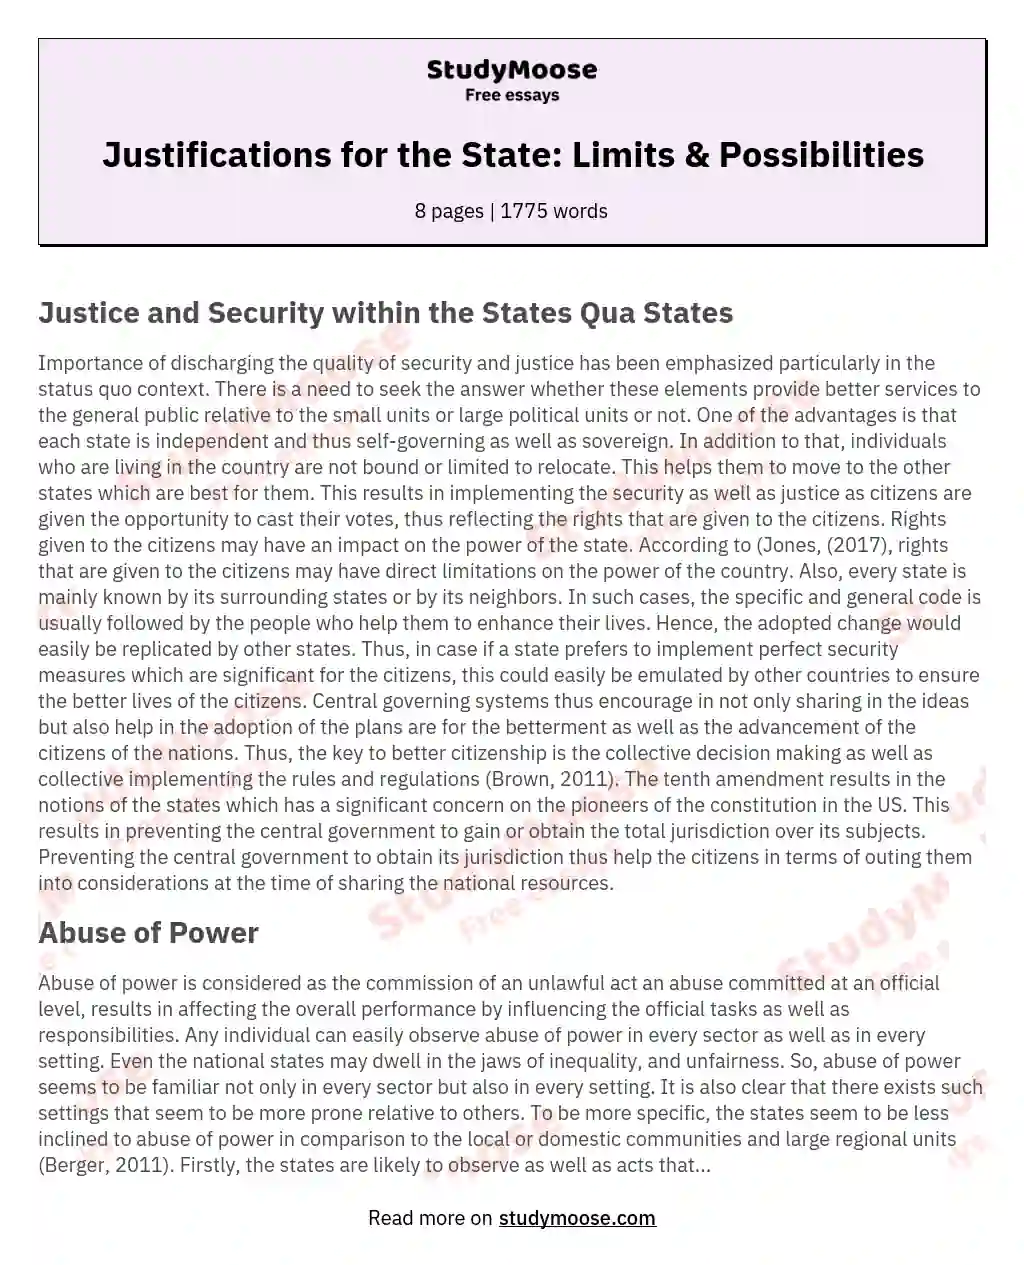 Justifications for the State: Limits & Possibilities